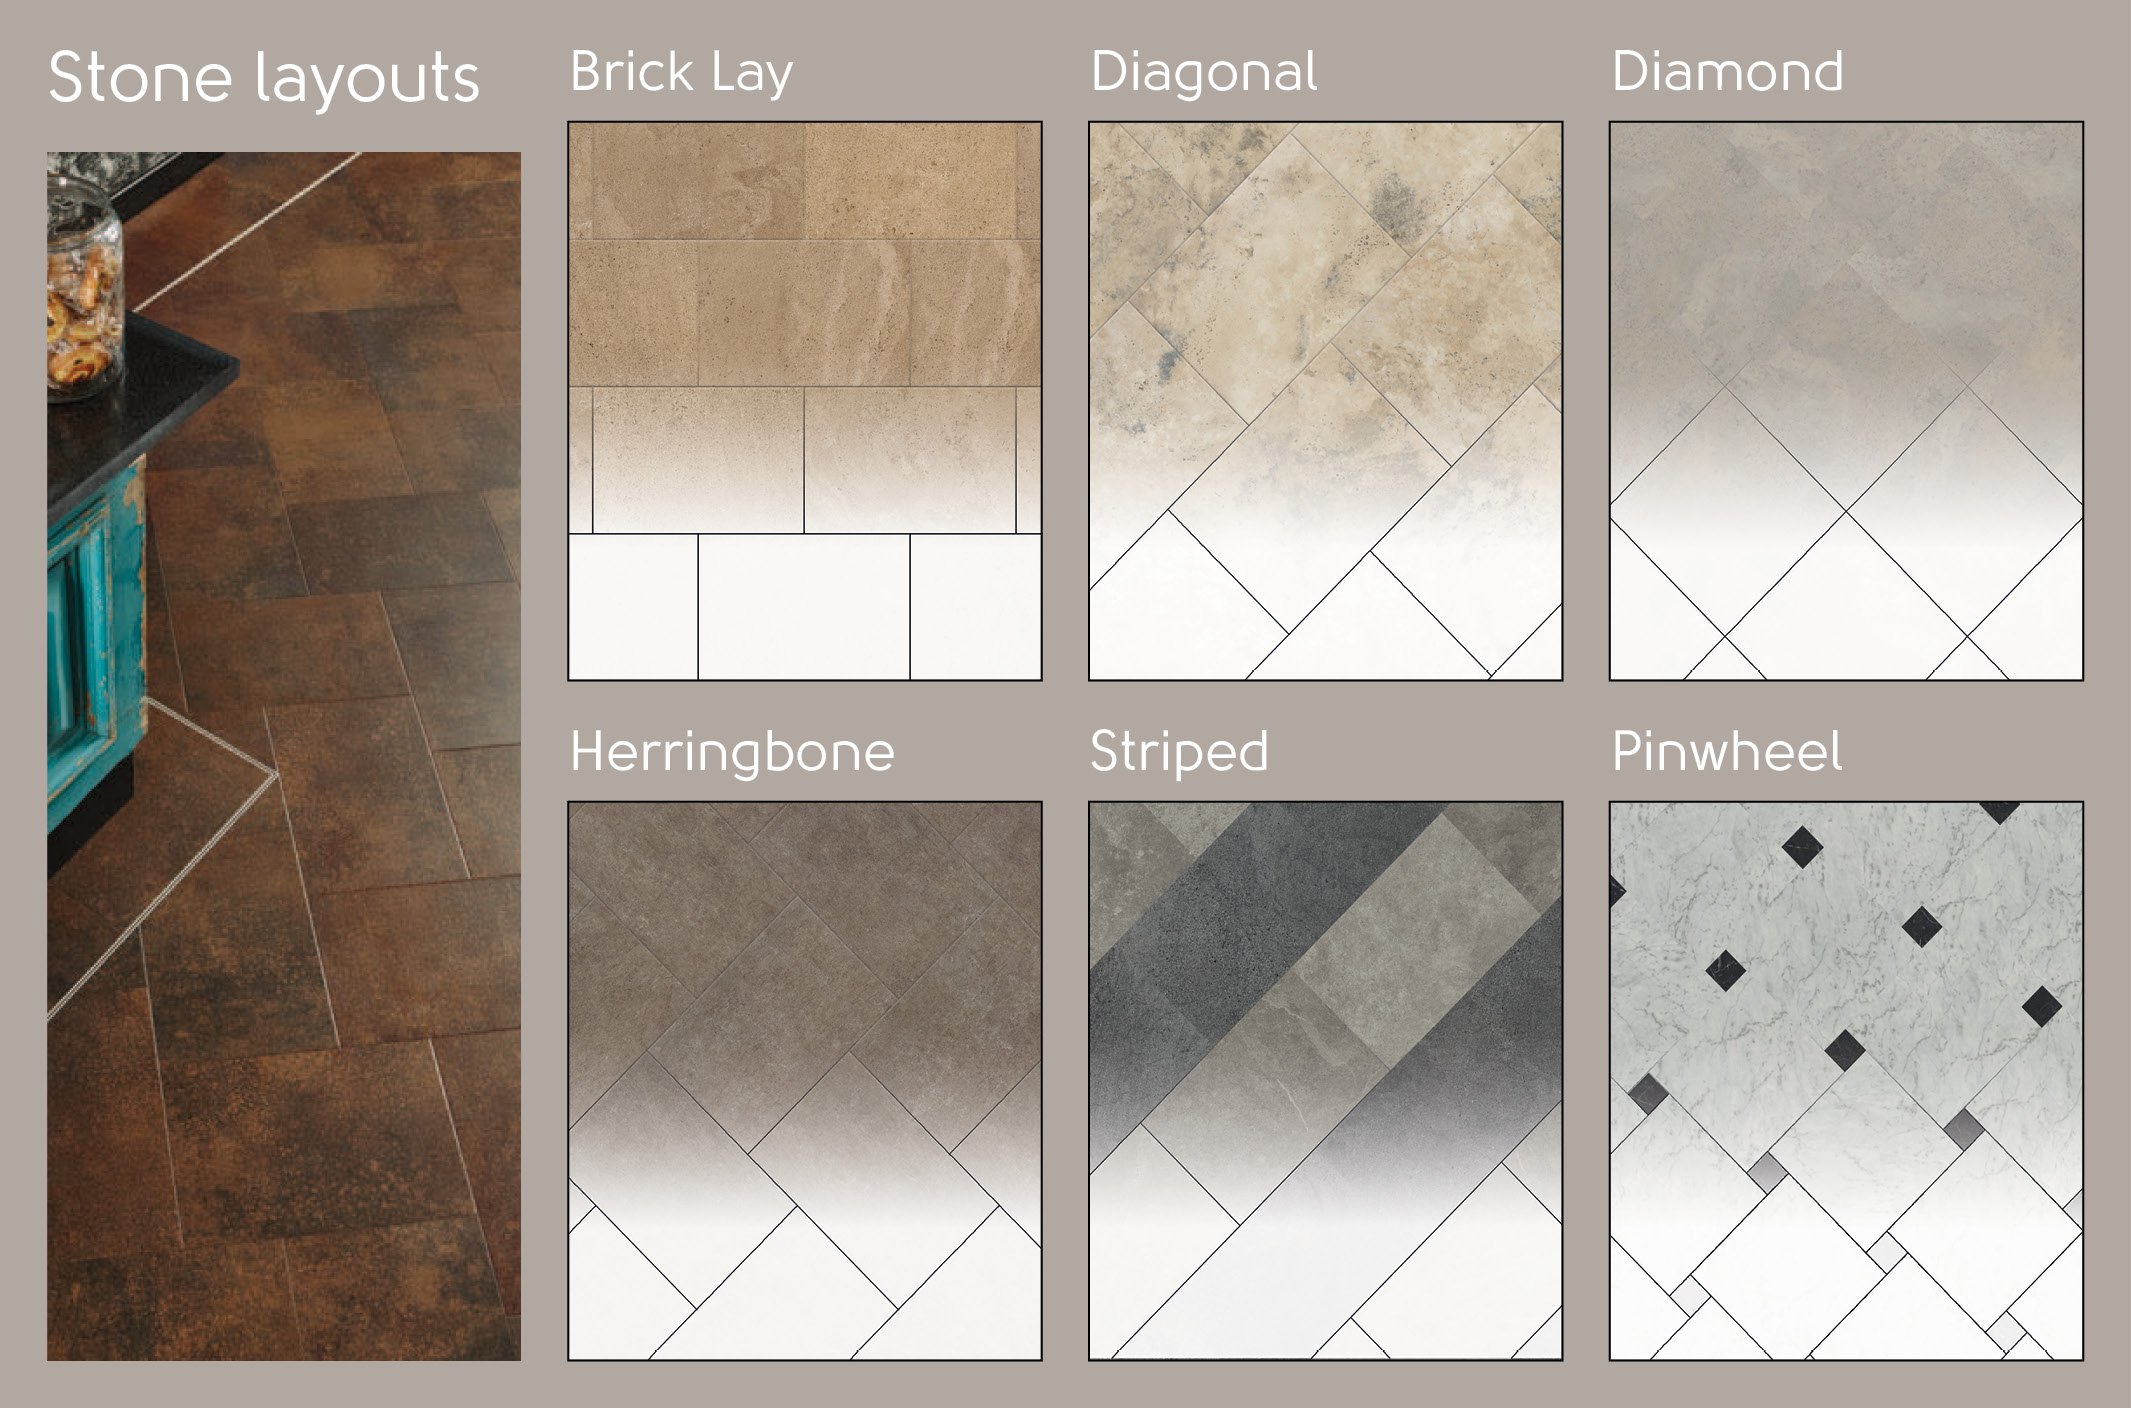 Laying patterns for stone gluedown products include brick lay, diagonal, diamond, herringbone, striped and pinwheel